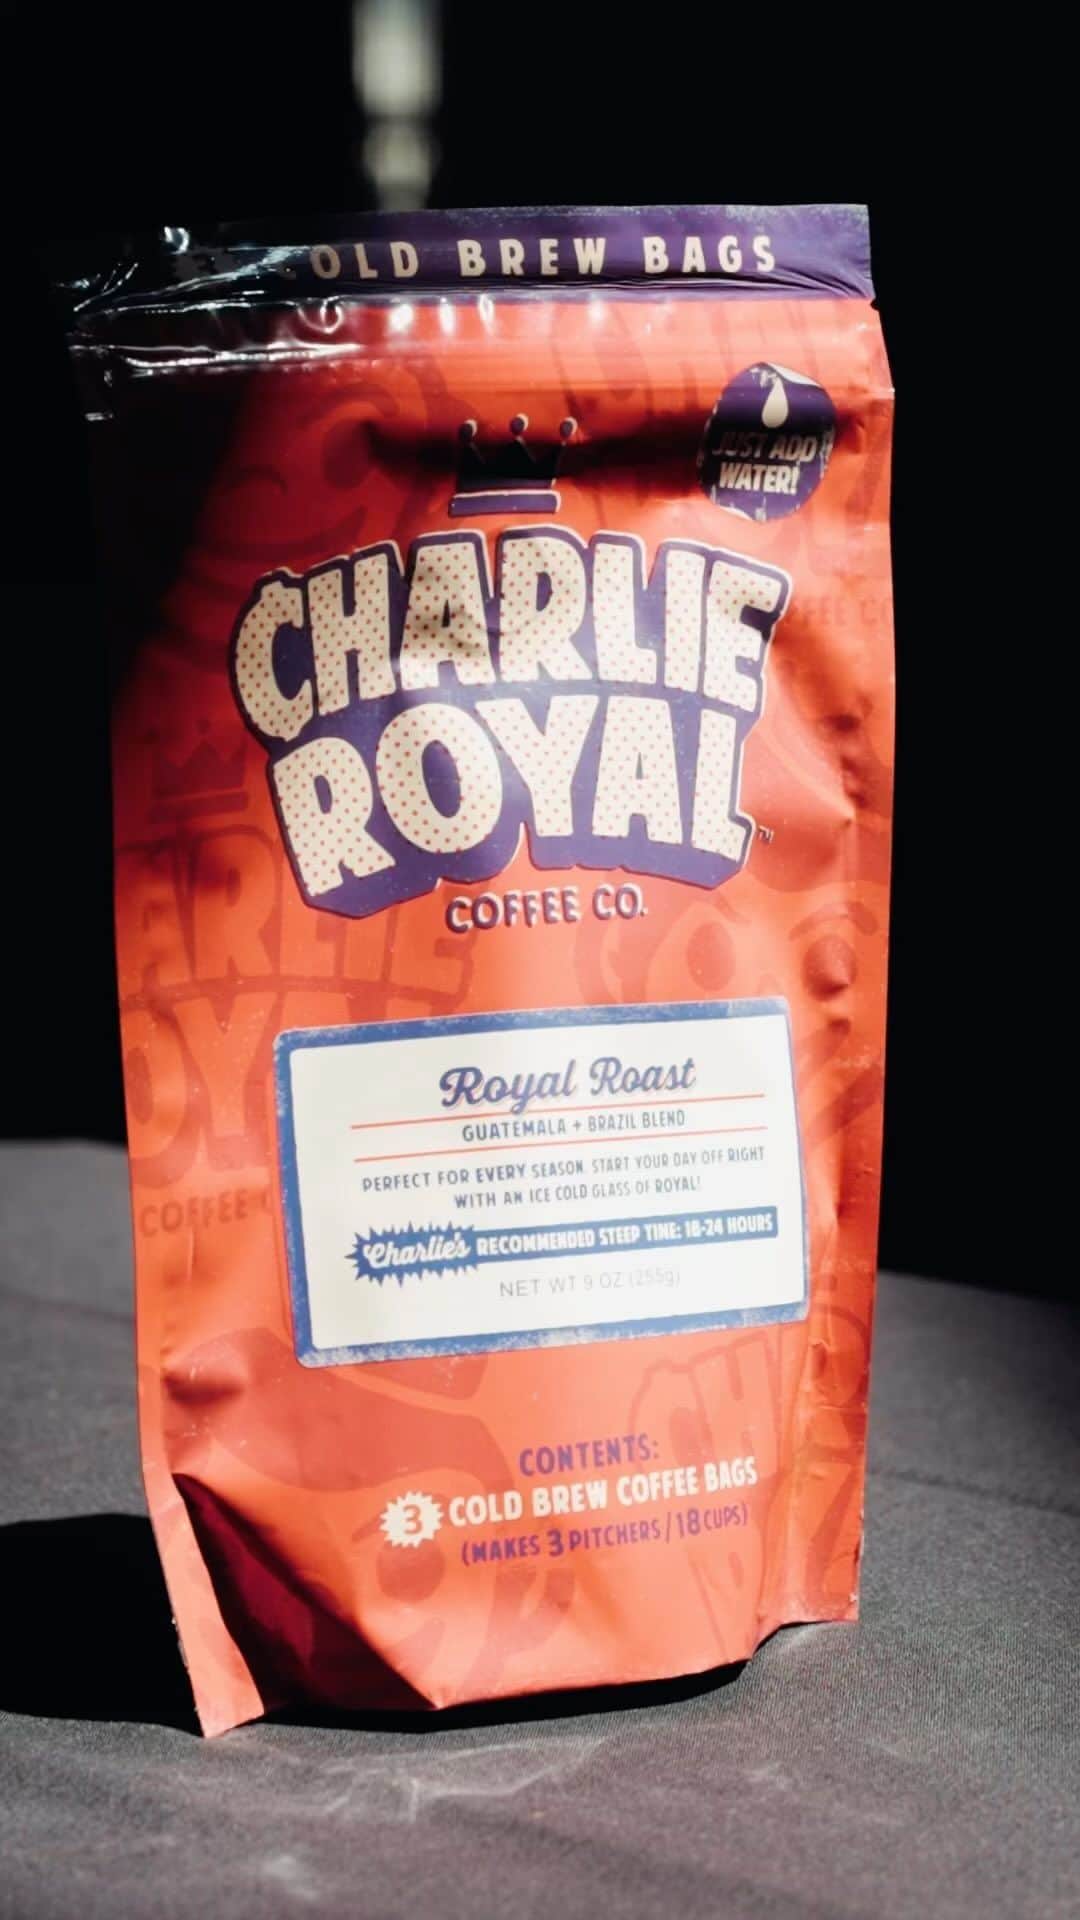 ニック・マーティンのインスタグラム：「THIS is how easy it is to make @charlieroyal cold brew. When I first started working on the idea of @charlieroyal, it was all based around the goal of making cold brew coffee as simple as possible, but also enjoyable to drink. There’s a lot of coffee companies out there that have similar products, but in my opinion, they don’t taste as good as our coffee. First & foremost, we use premium, high quality beans from my favorite roaster in the world versus the other companies that use cheaper quality beans. Second, our cold brew packets are actually made from coffee shop grade mesh filters specifically used to make cold brew - they don’t tear/rip like the cheap packets other companies use. No shortcuts have been taken when it comes to @charlieroyal. Could I have taken easier, cheaper routes when starting this company? Absolutely! But, that’s not something I’d be proud of. @charlieroyal is more than just a hobby, it’s a project I hold dear to my heart, something that I’m extremely proud of & is an extension of me. It’s my baby! I created @charlieroyal so others could enjoy coffee as much as I do. I wanted to share this with others & make it easy for anyone to make cold brew at home, at work, or on tour 🤘🏽 I spent so many years trying out countless cold brew methods - all of the various coffee grinders, scales, finding the right coffee to use, the brewing vessels, the right filters, the best ratios, etc - I went through all of the trial & error so you don’t have to 🤣👍🏽 Buy a bag of @charlieroyal cold brew, drop a packet into water, let it steep, and you have yourself some delicious cold brew. That’s it! All you need is water, a mason jar, & some patience. Thank you to everyone who has supported @charlieroyal in any way possible & to those who have read this far 👑❤️ Much love! Now, are you ready to try @charlieroyal? . 🎥: @nickalausstafford (Thank you for making this awesome video while on tour together!) . #coffee #coffeetime #coldbrew #coldbrewcoffee #coffeelover #coffeeshop #coffeebar #coffeeaddict #coffeelovers #coffeelife #coffeelifestyle #coffeelove」